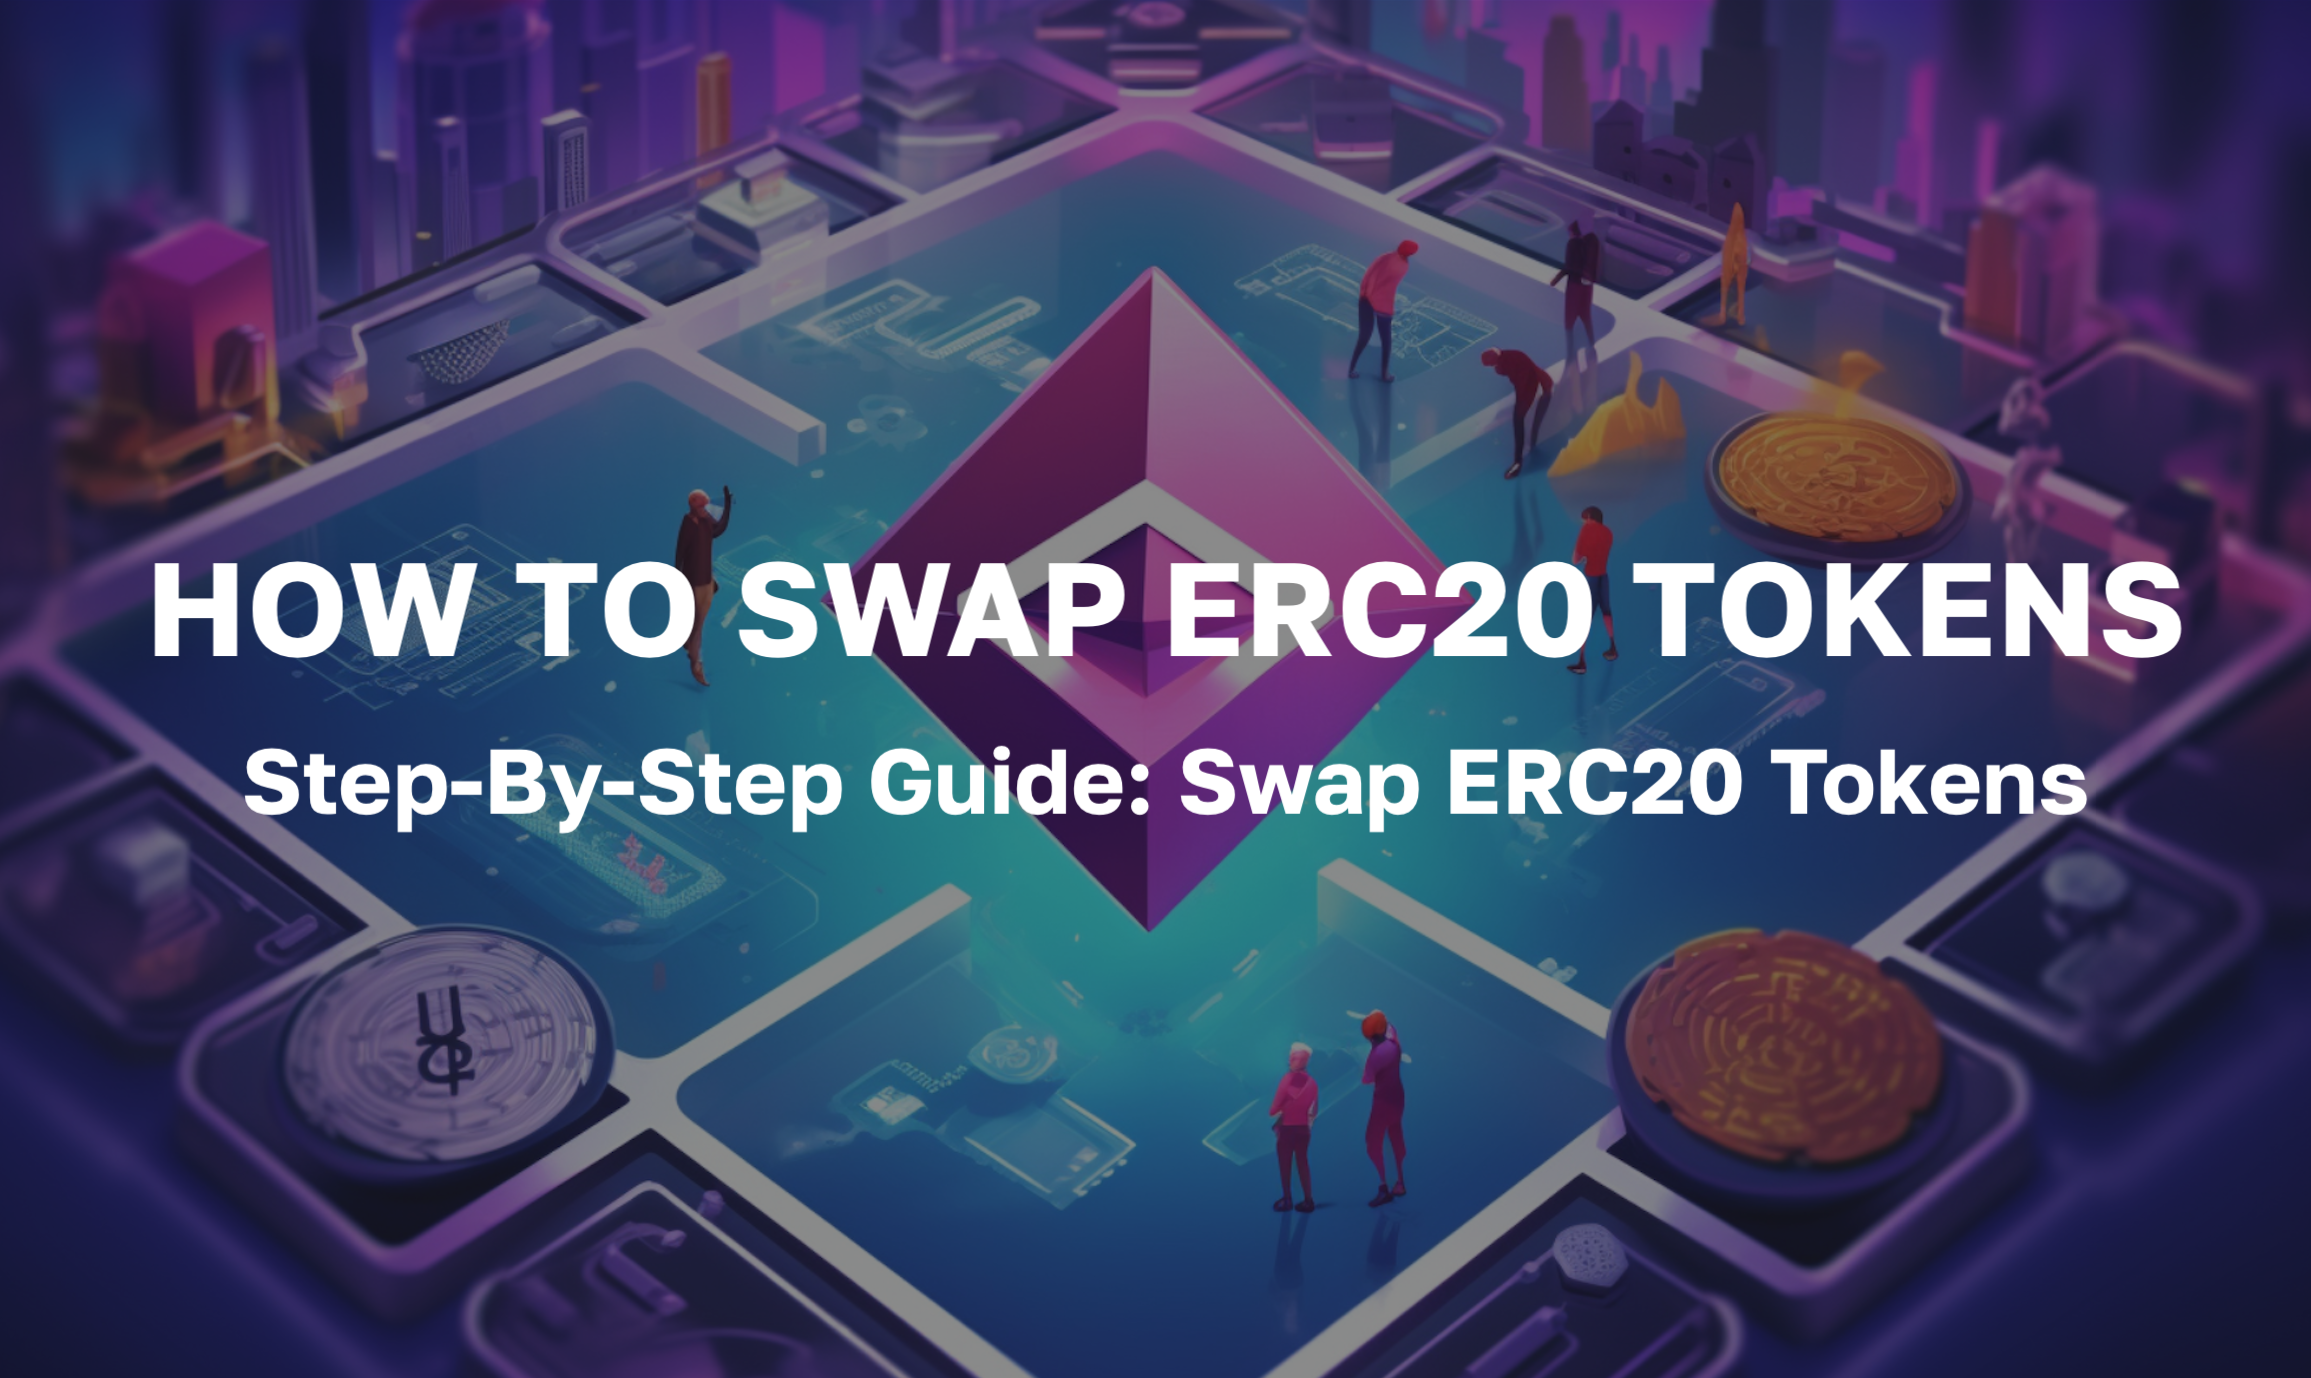 Step-By-Step Guide/ How to Swap ERC20 Tokens